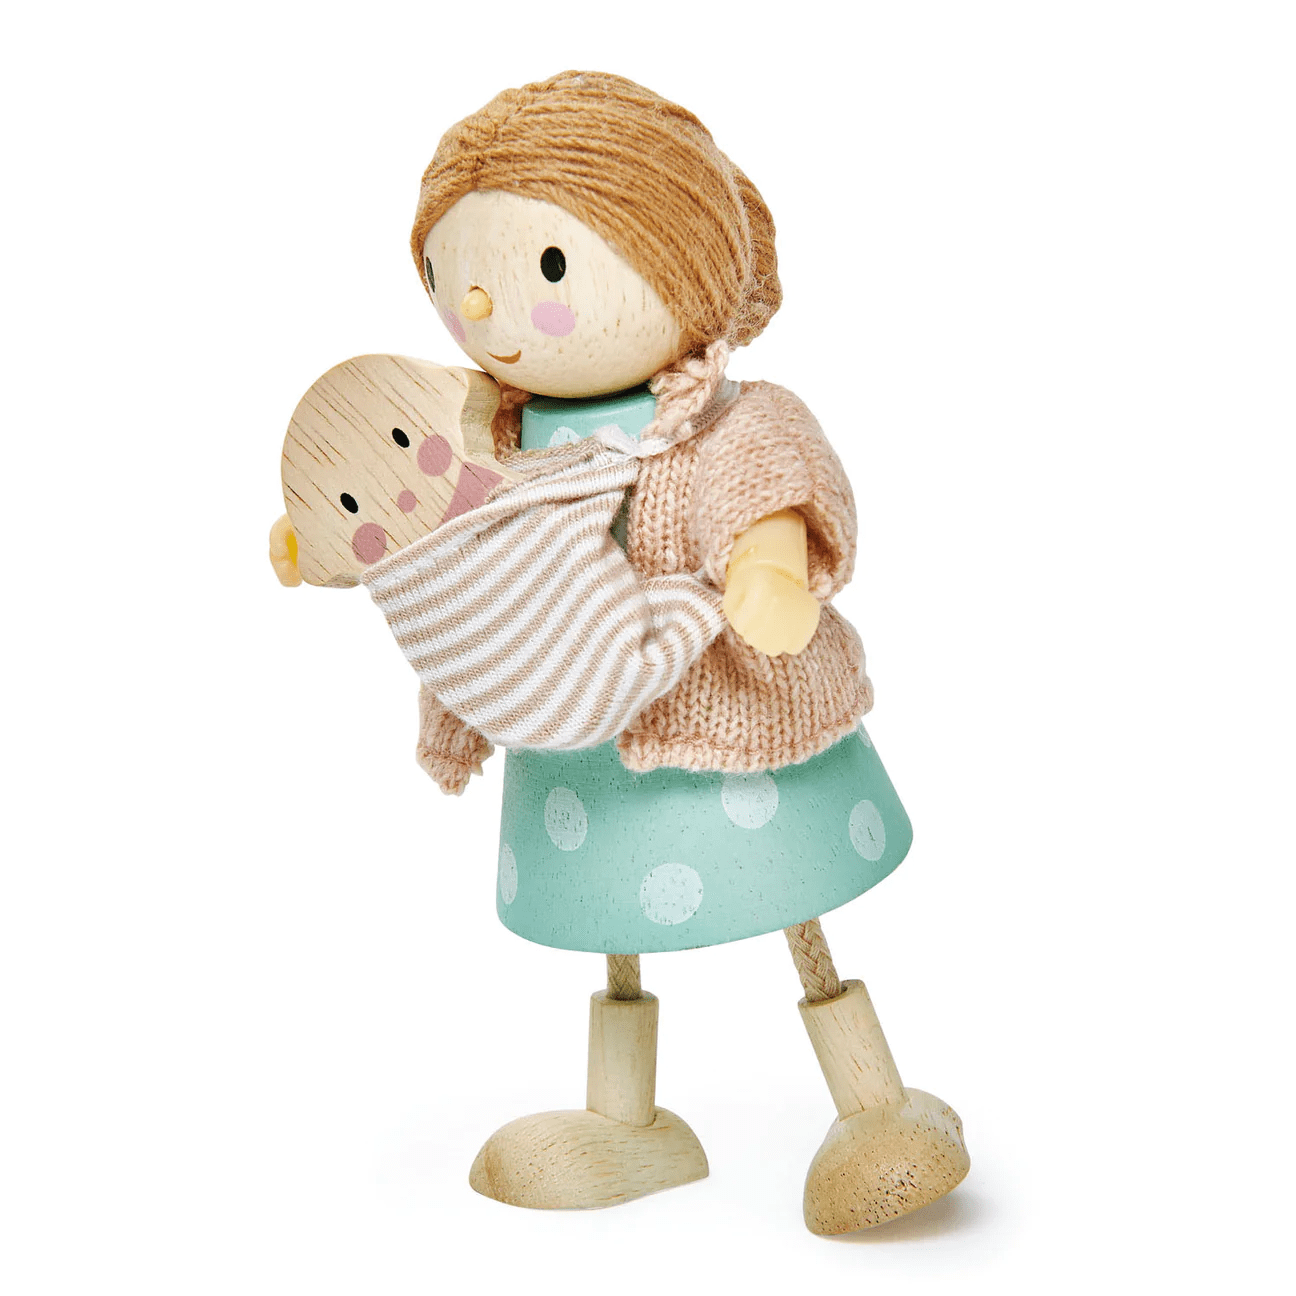 Mrs. Goodwood and The Baby | Tender Leaf Toys | Iris Gifts & Décor